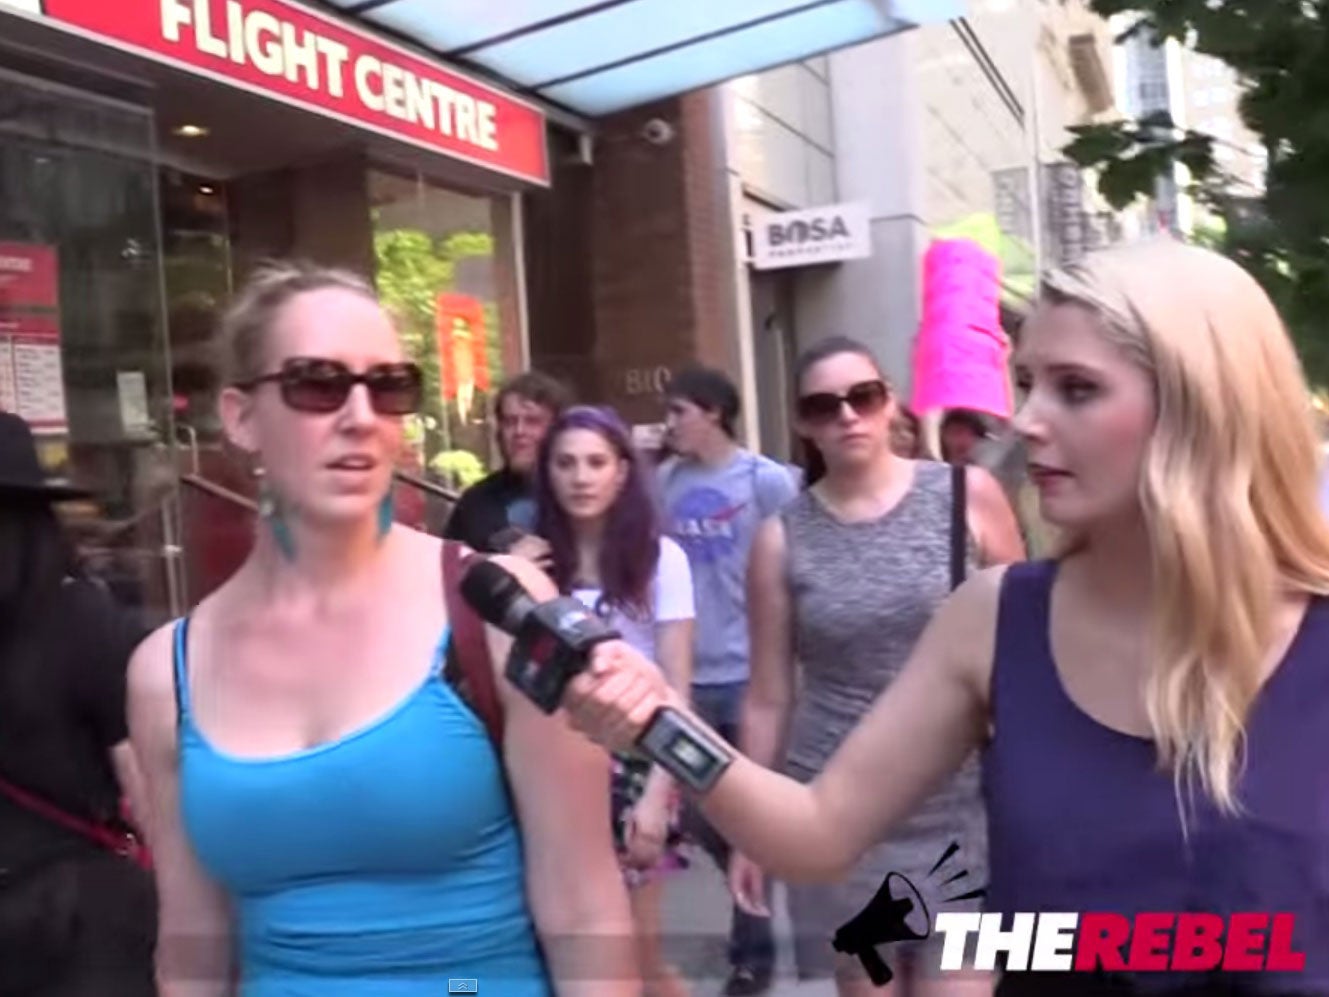 The reporter claims she got into a "huge confrontation" with those involved